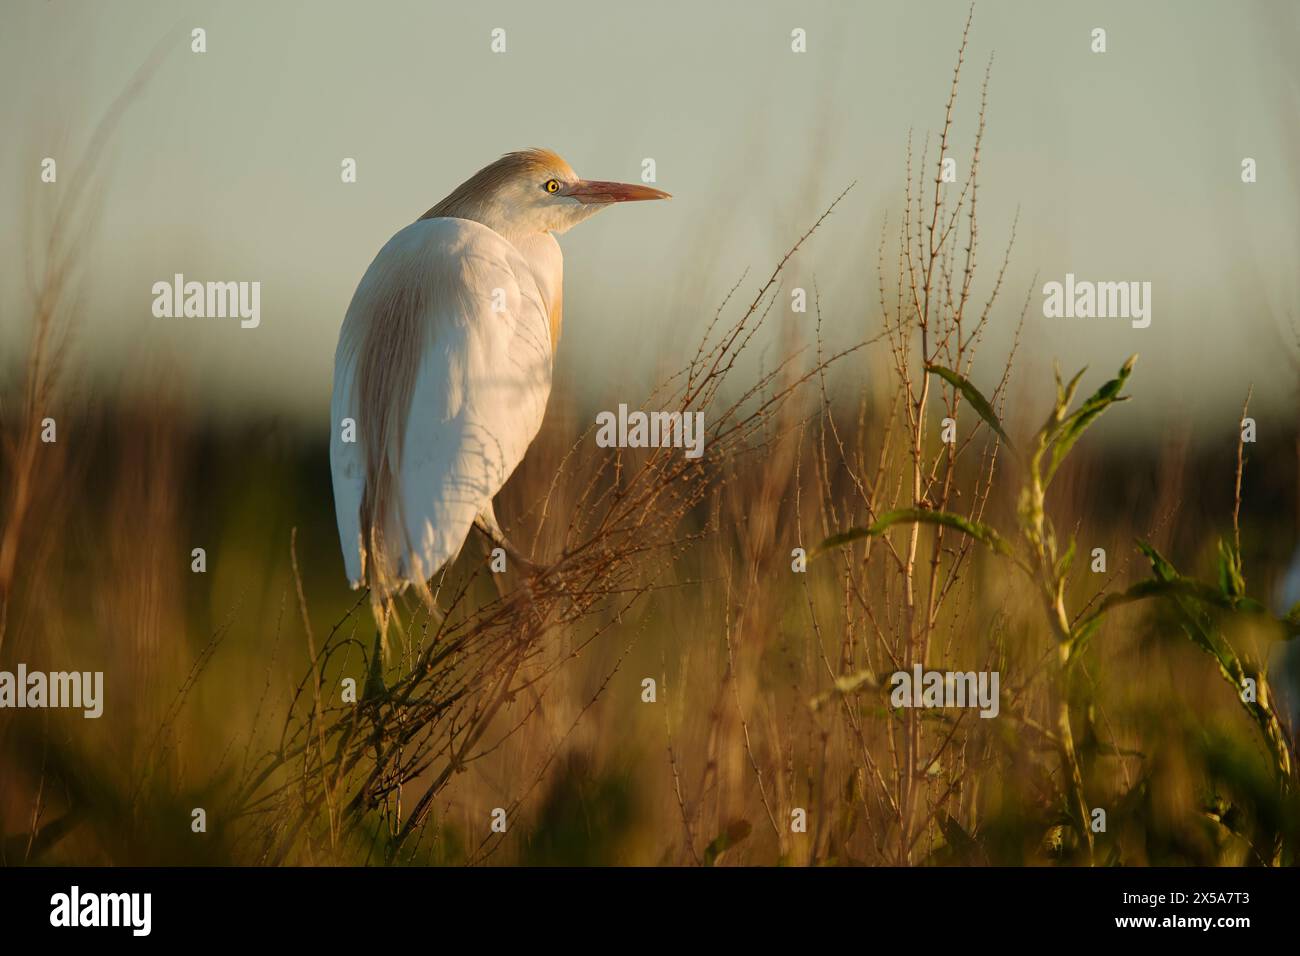 A peaceful cattle egret stands amidst tall grass, bathed in the warm glow of the setting sun, showcasing a tranquil wildlife scene Stock Photo